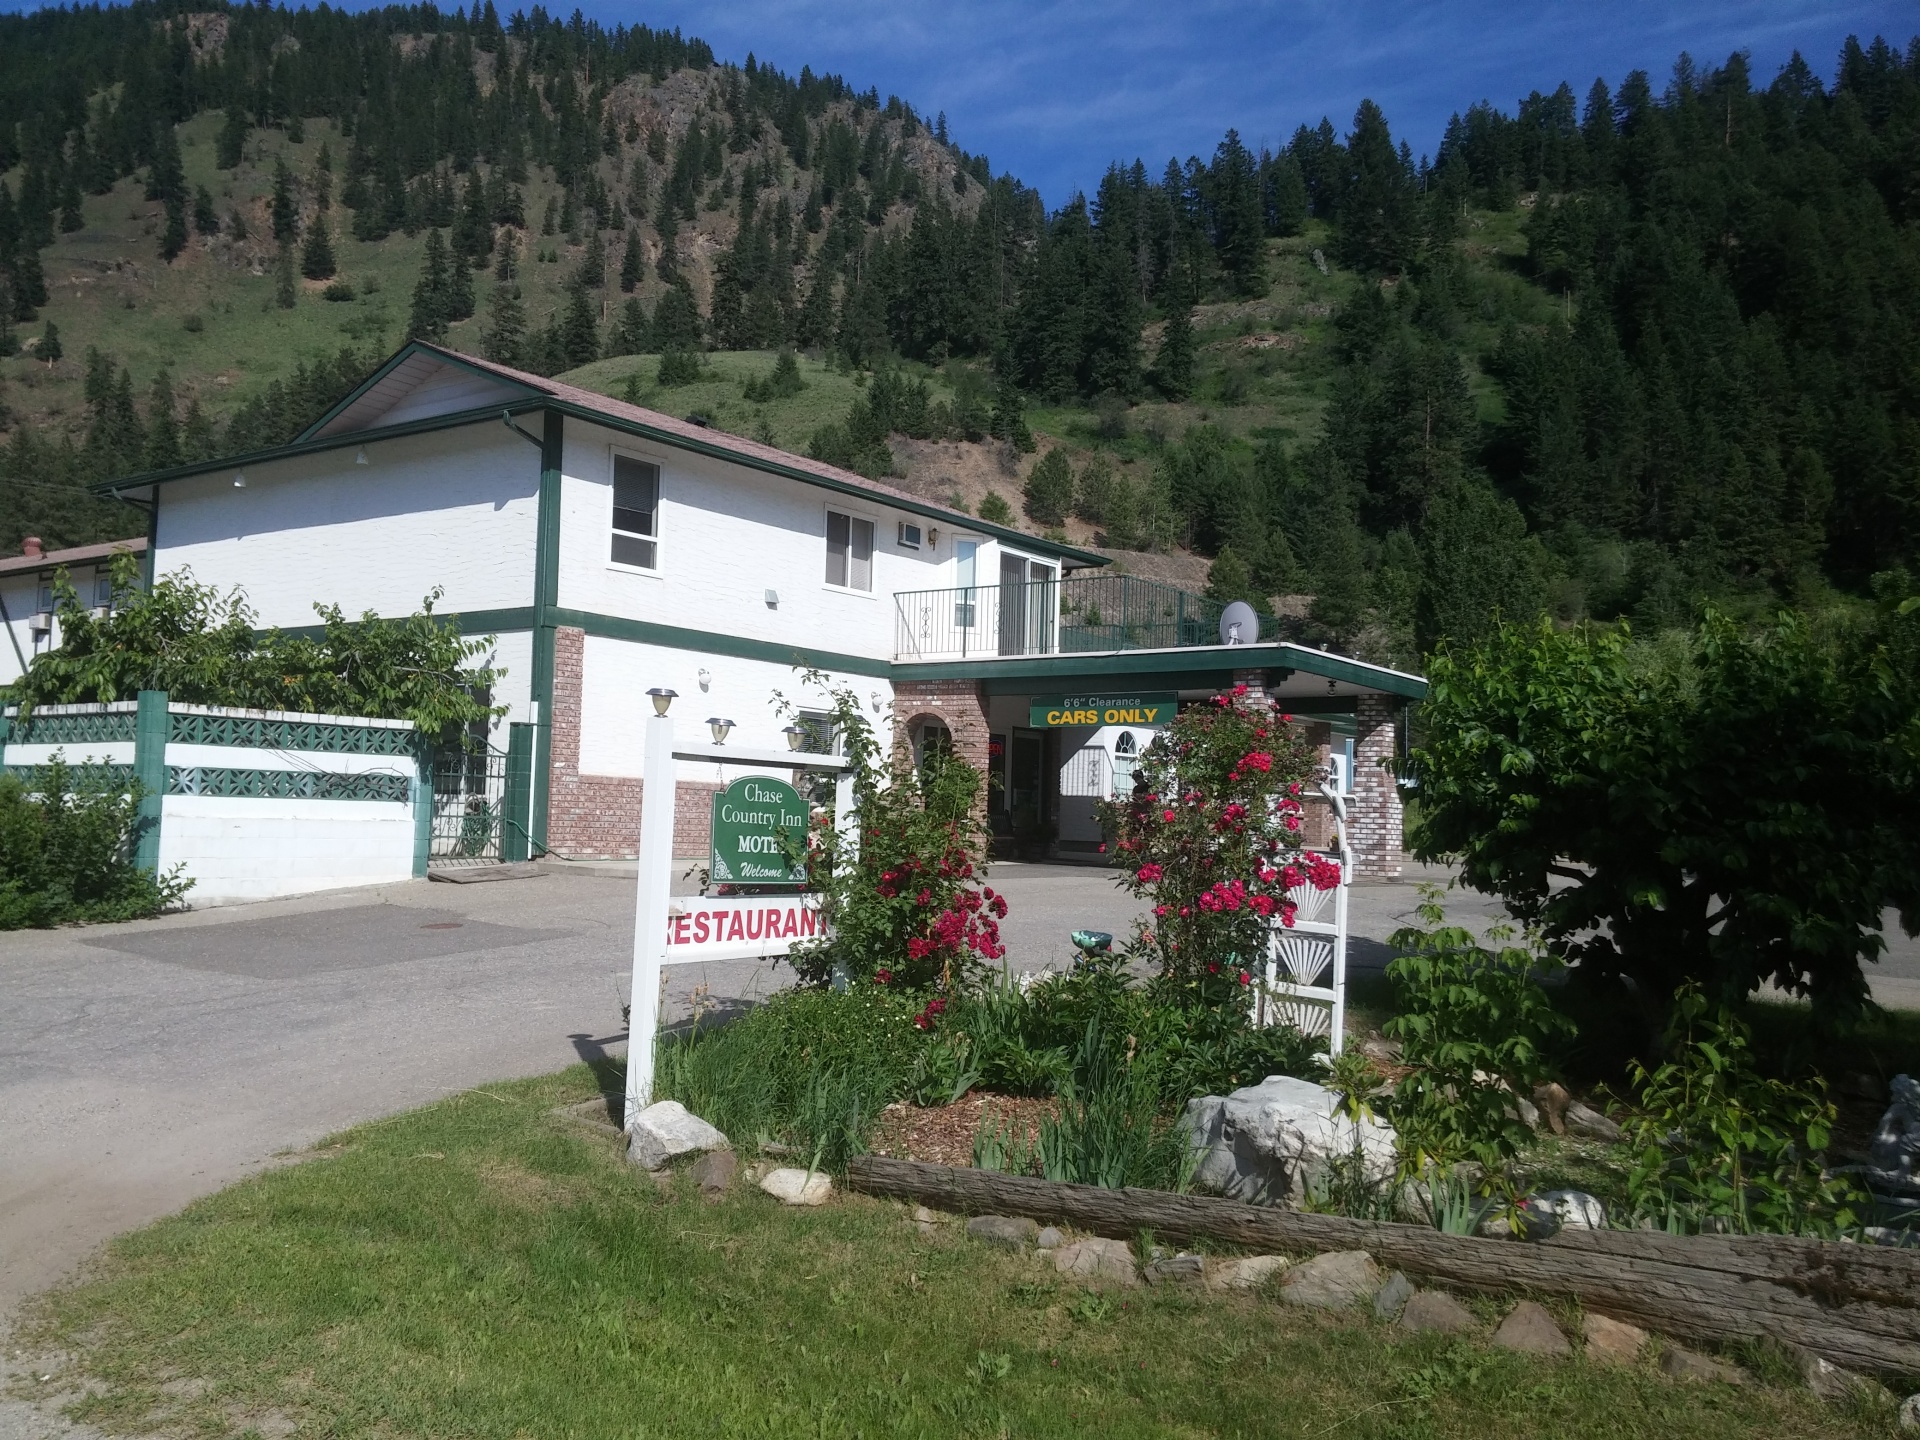 Chase Country Inn Motel: The Chase Country Inn is a family-run motel located just off the highway in the beautiful Shuswap. Guests can enjoy high speed wi-fi, and complimentary breakfast May through October.